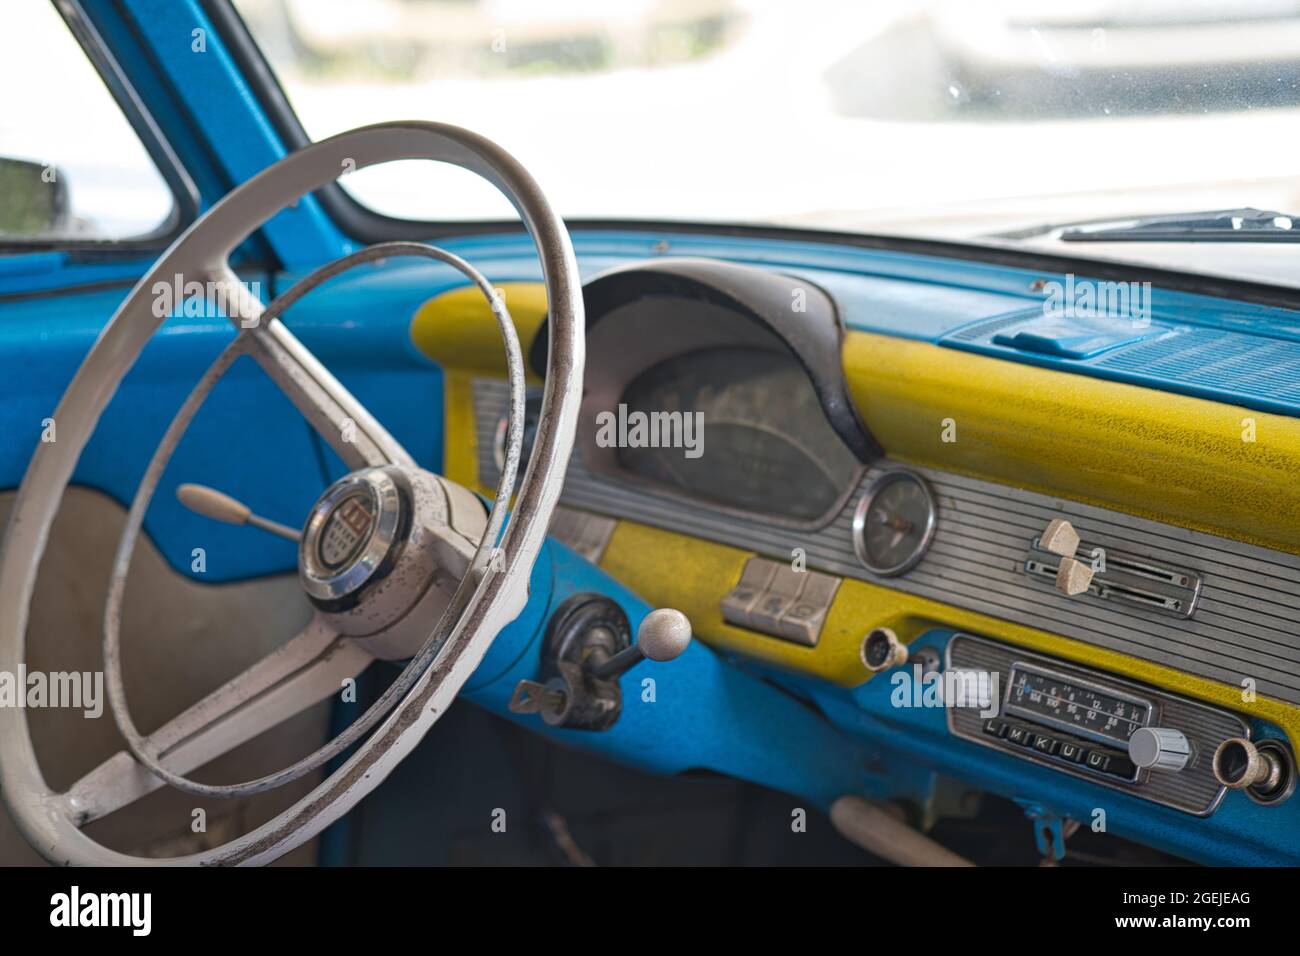 COLOGNE, GERMANY - Jul 25, 2021: An interior of a vintage yellow and blue Ford  Taunus, made in the 60s Stock Photo - Alamy